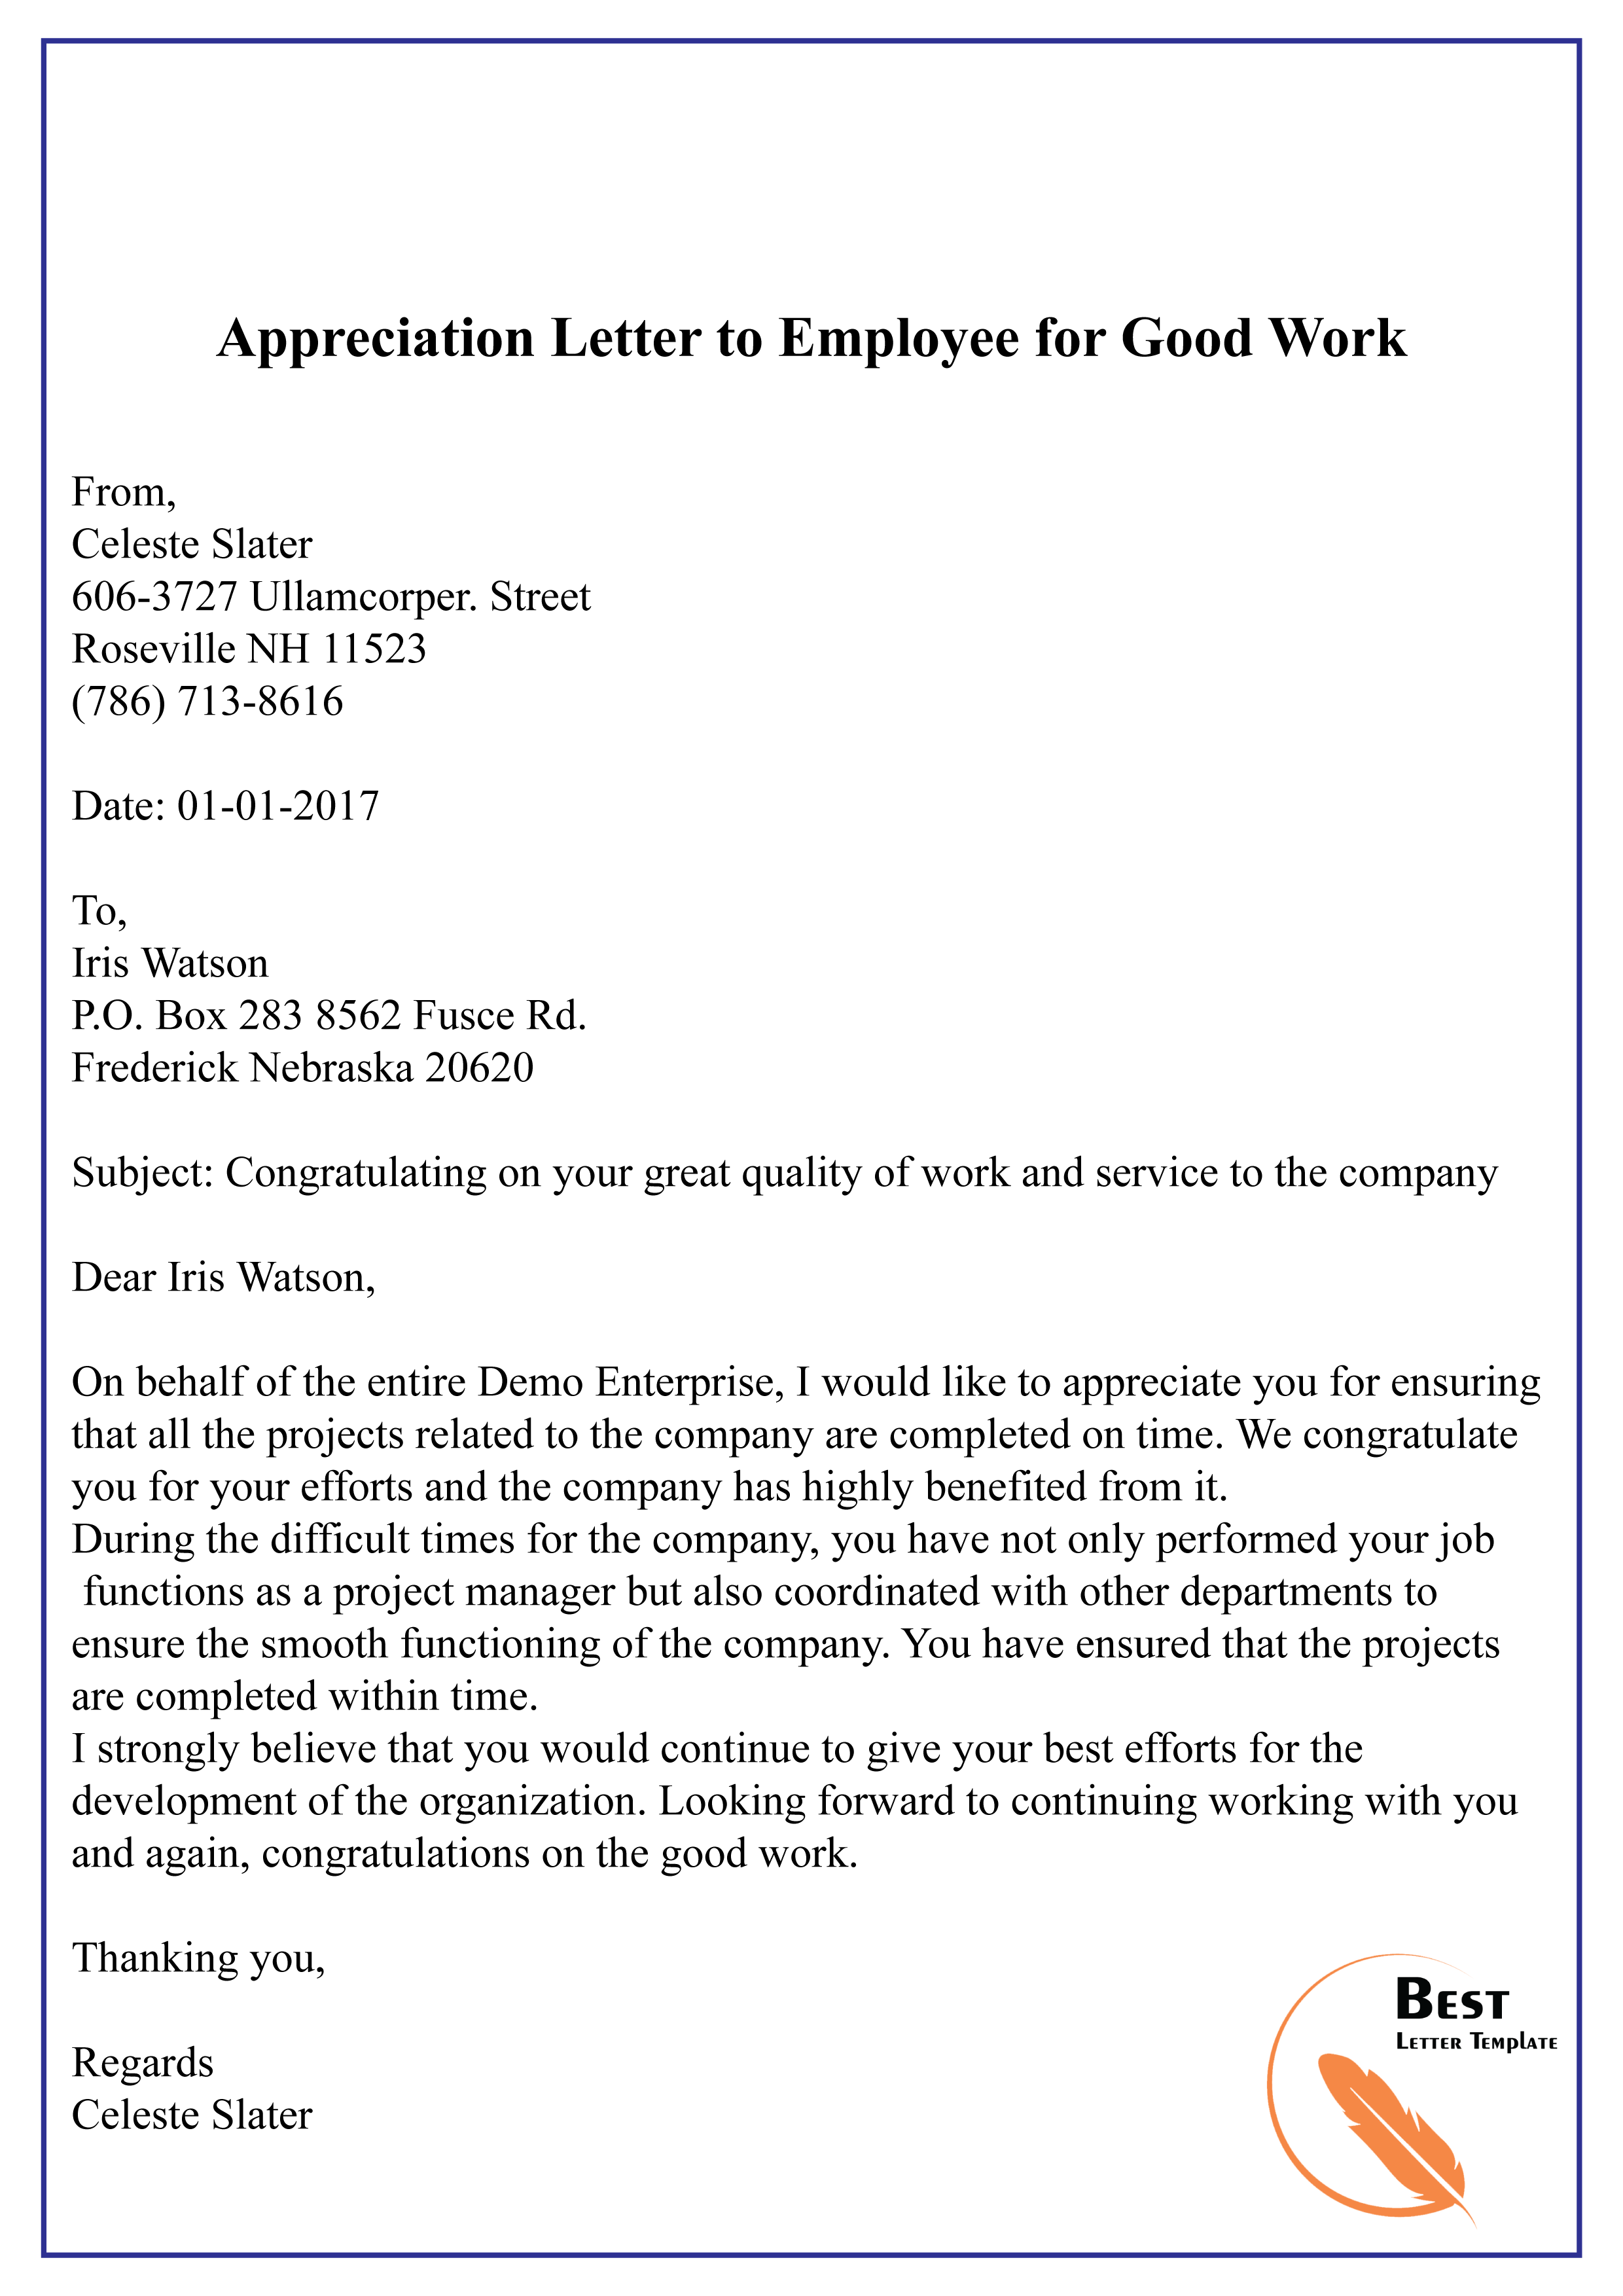 appreciation-letter-to-employee-for-good-work-01-best-letter-template